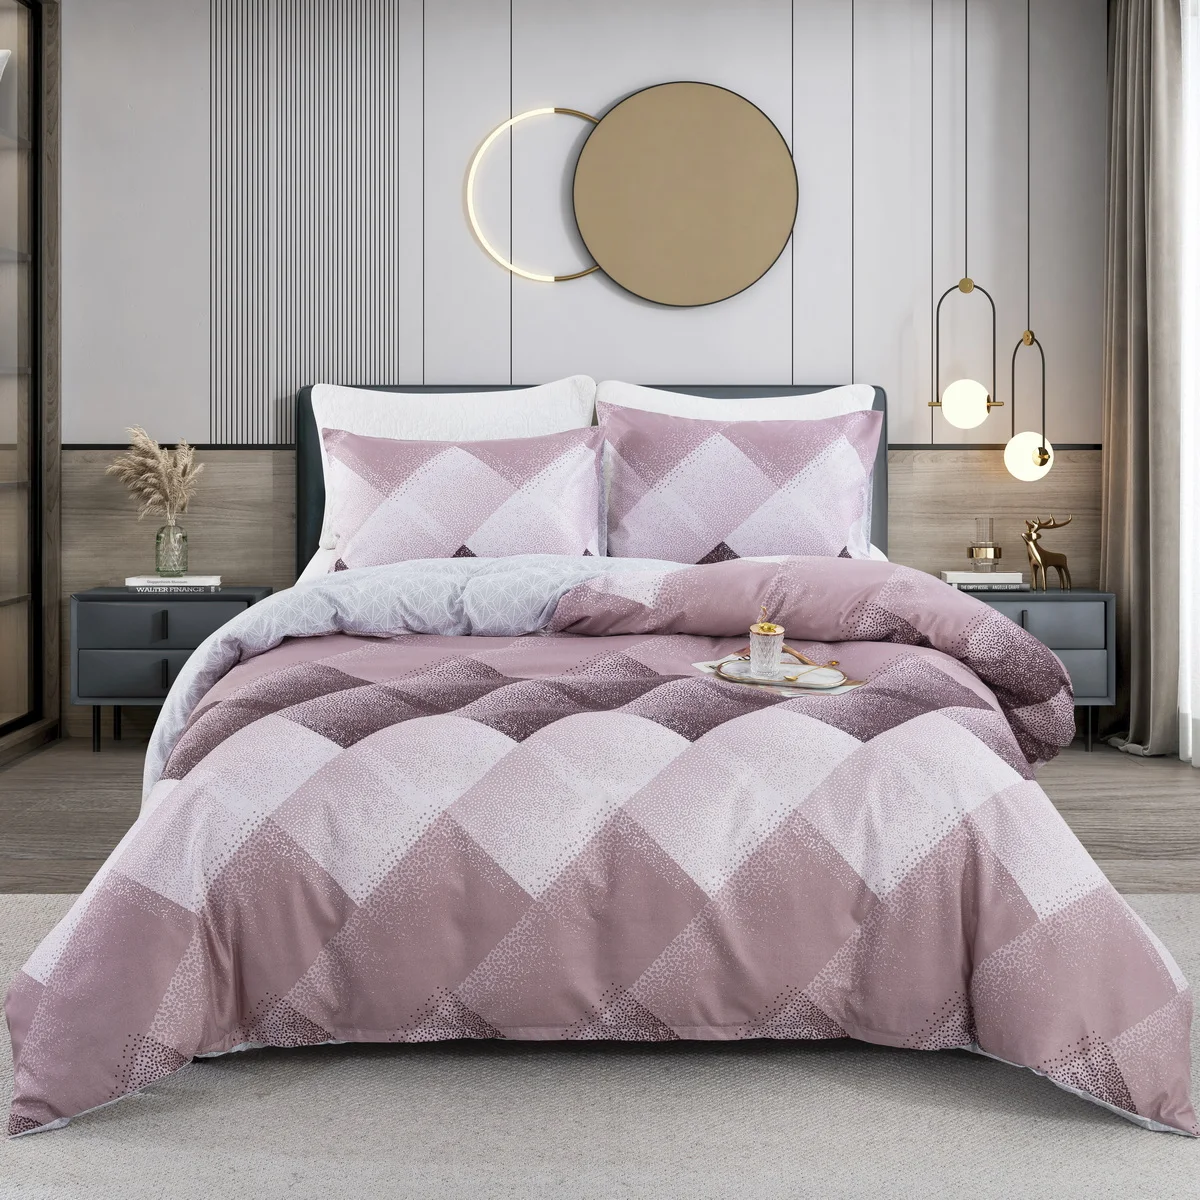 

Purple Pink Geometric Pattern Duvet Cover Set and 2 Pillowcase,3 Pcs Soft Fluffy Bed Linen Set with Zip, Luxury Dots Bedding Set